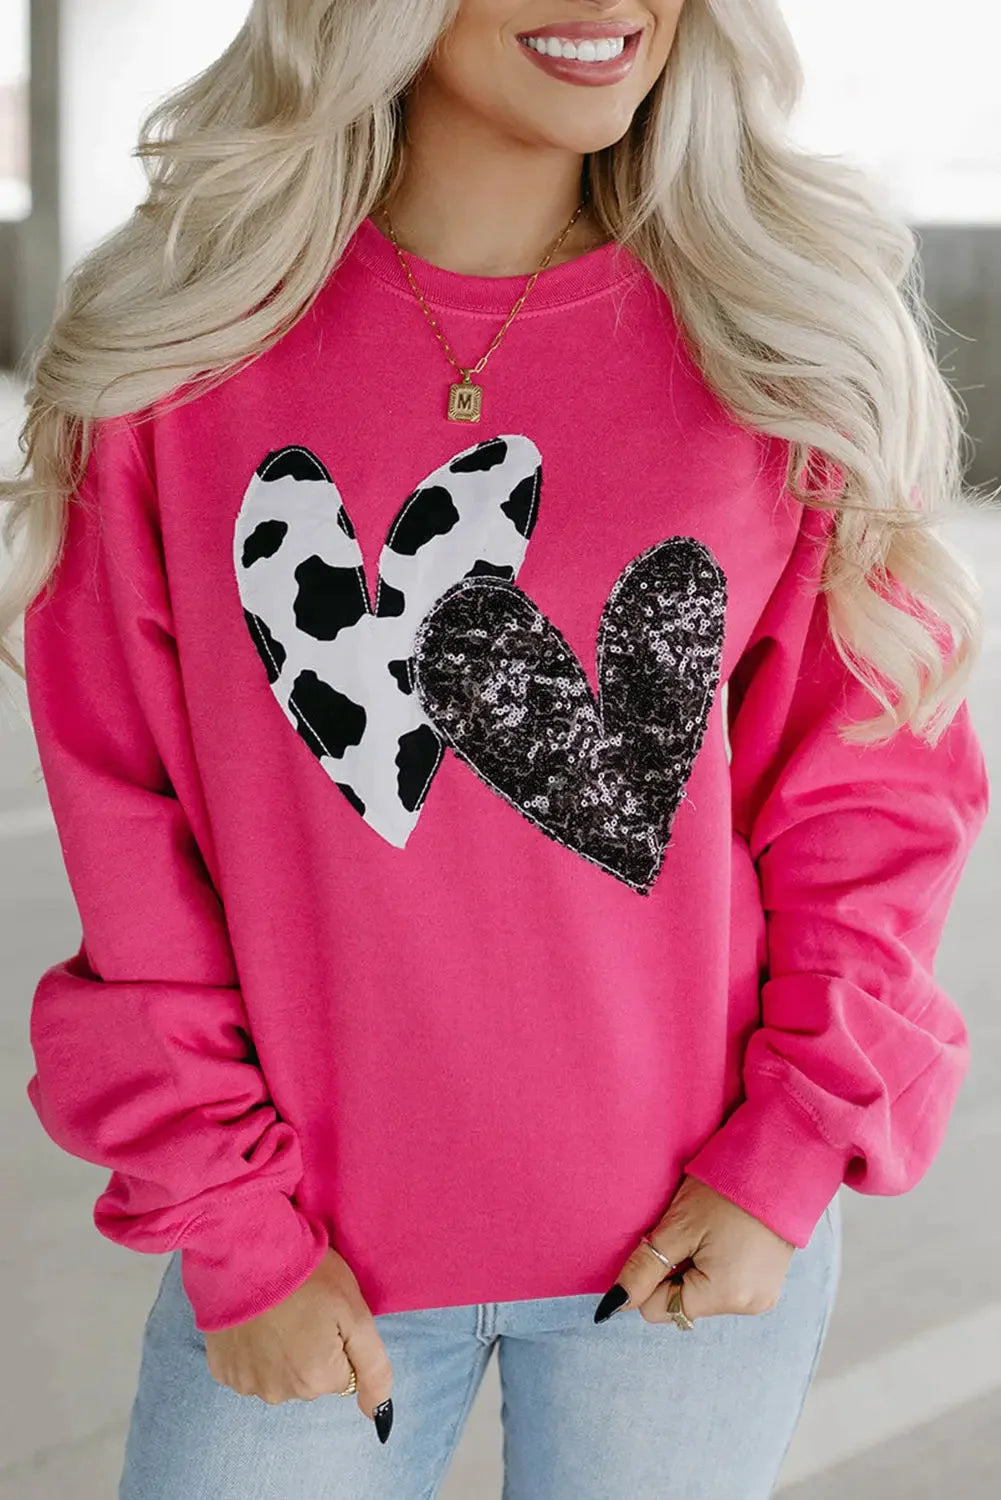 Strawberry pink cow & sequin double heart patch graphic sweatshirt - l 62.7% polyester + 37.3% cotton sweatshirts